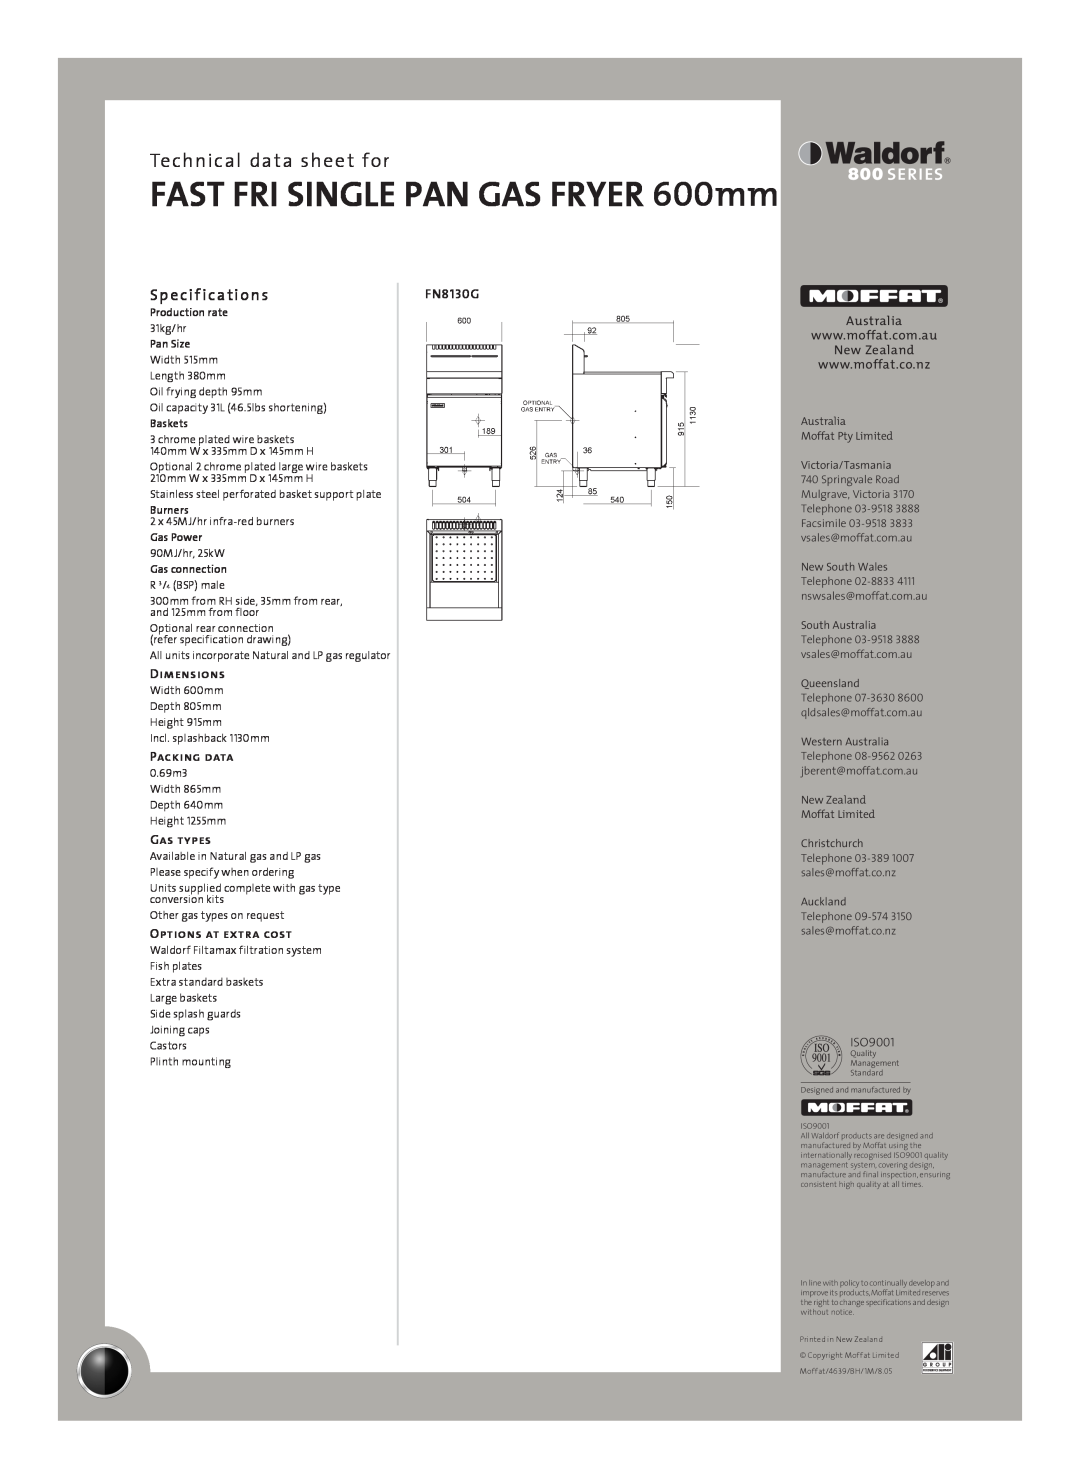 Moffat FN8130G Sp e cif ications, FAST FRI SINGLE PAN GAS FRYER 600mm, Technical data sheet for, Dimensions, Packing data 